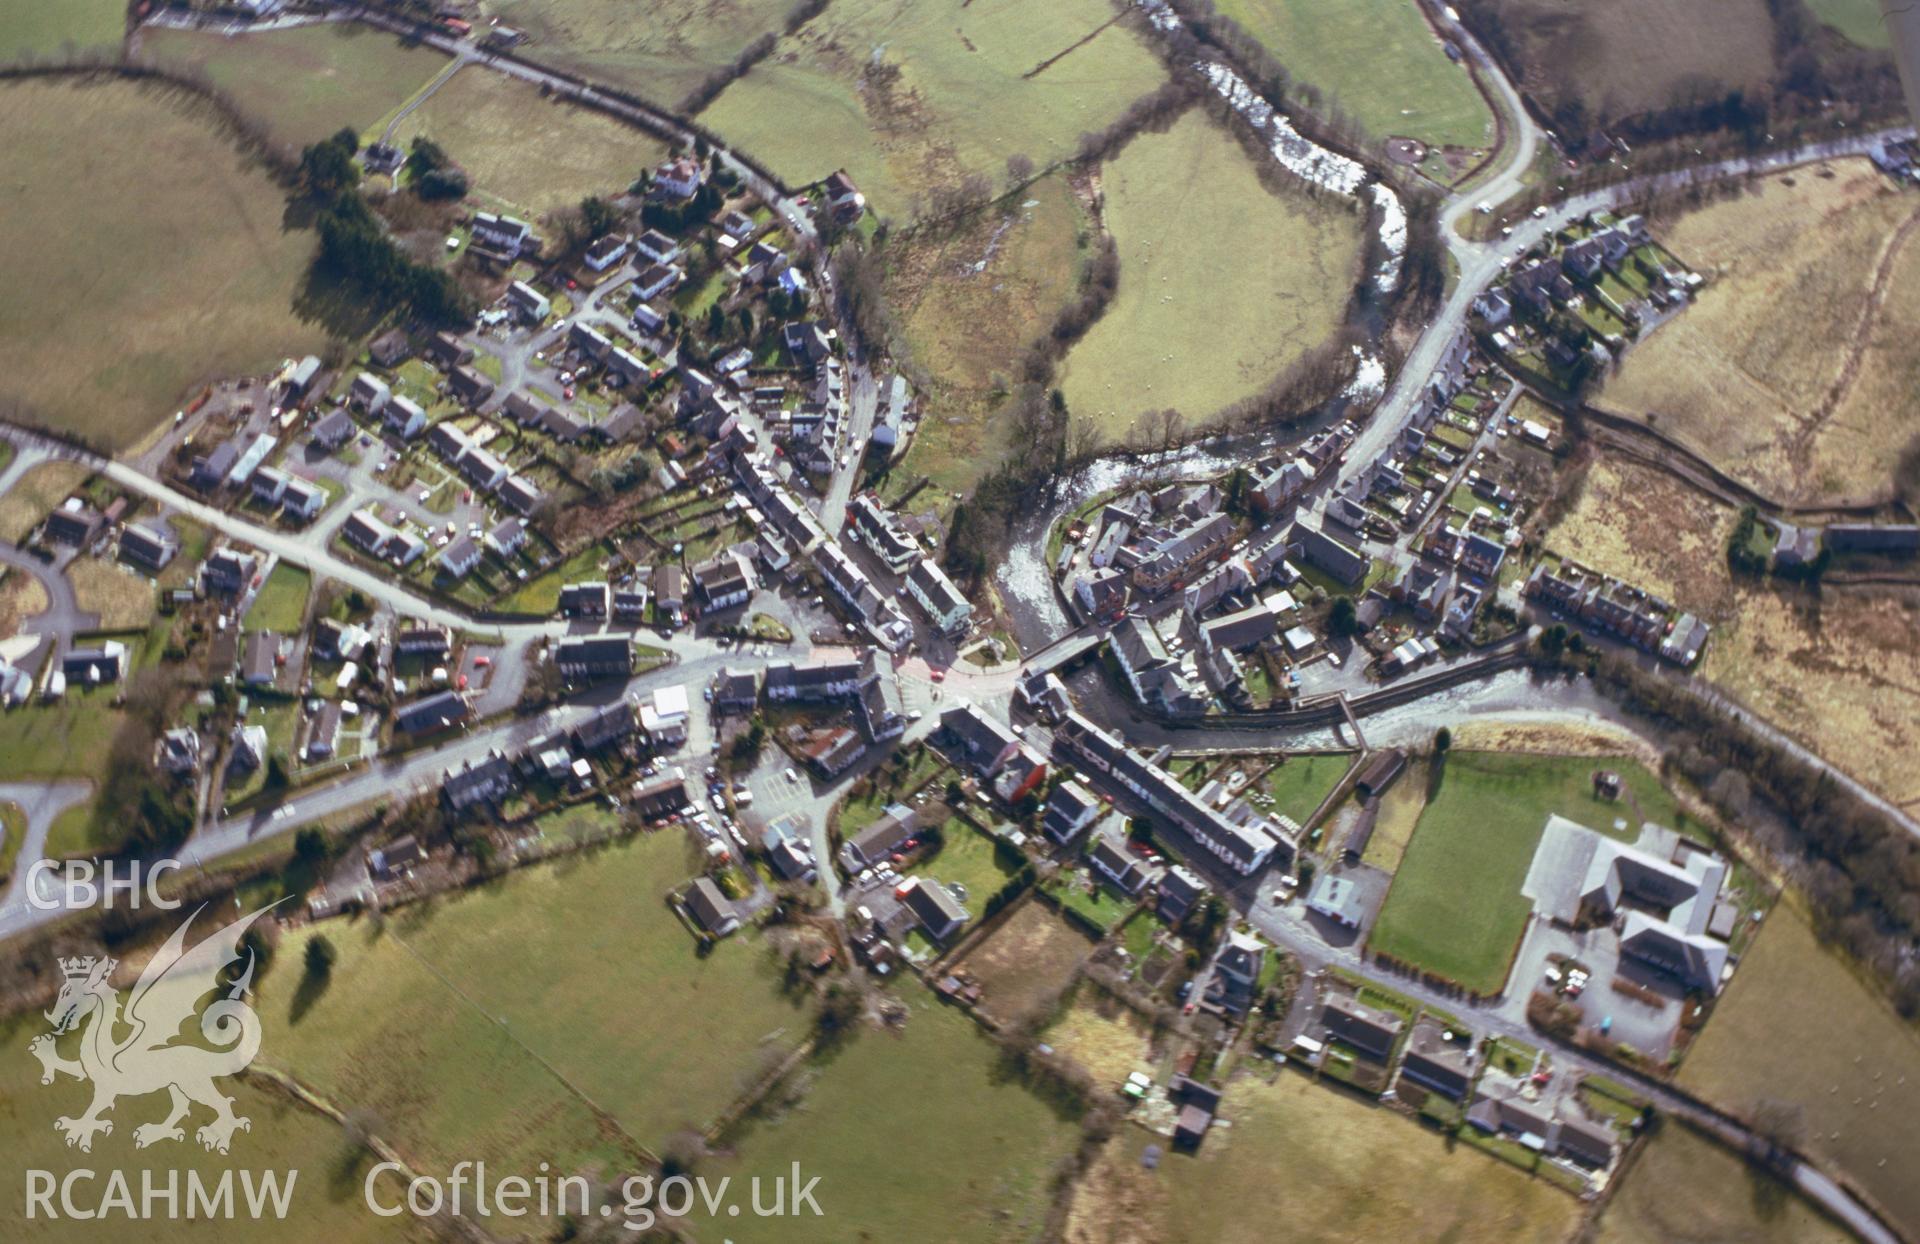 Slide of RCAHMW colour oblique aerial photograph of Llanwrtyd Wells taken by T.G. Driver, 2001.